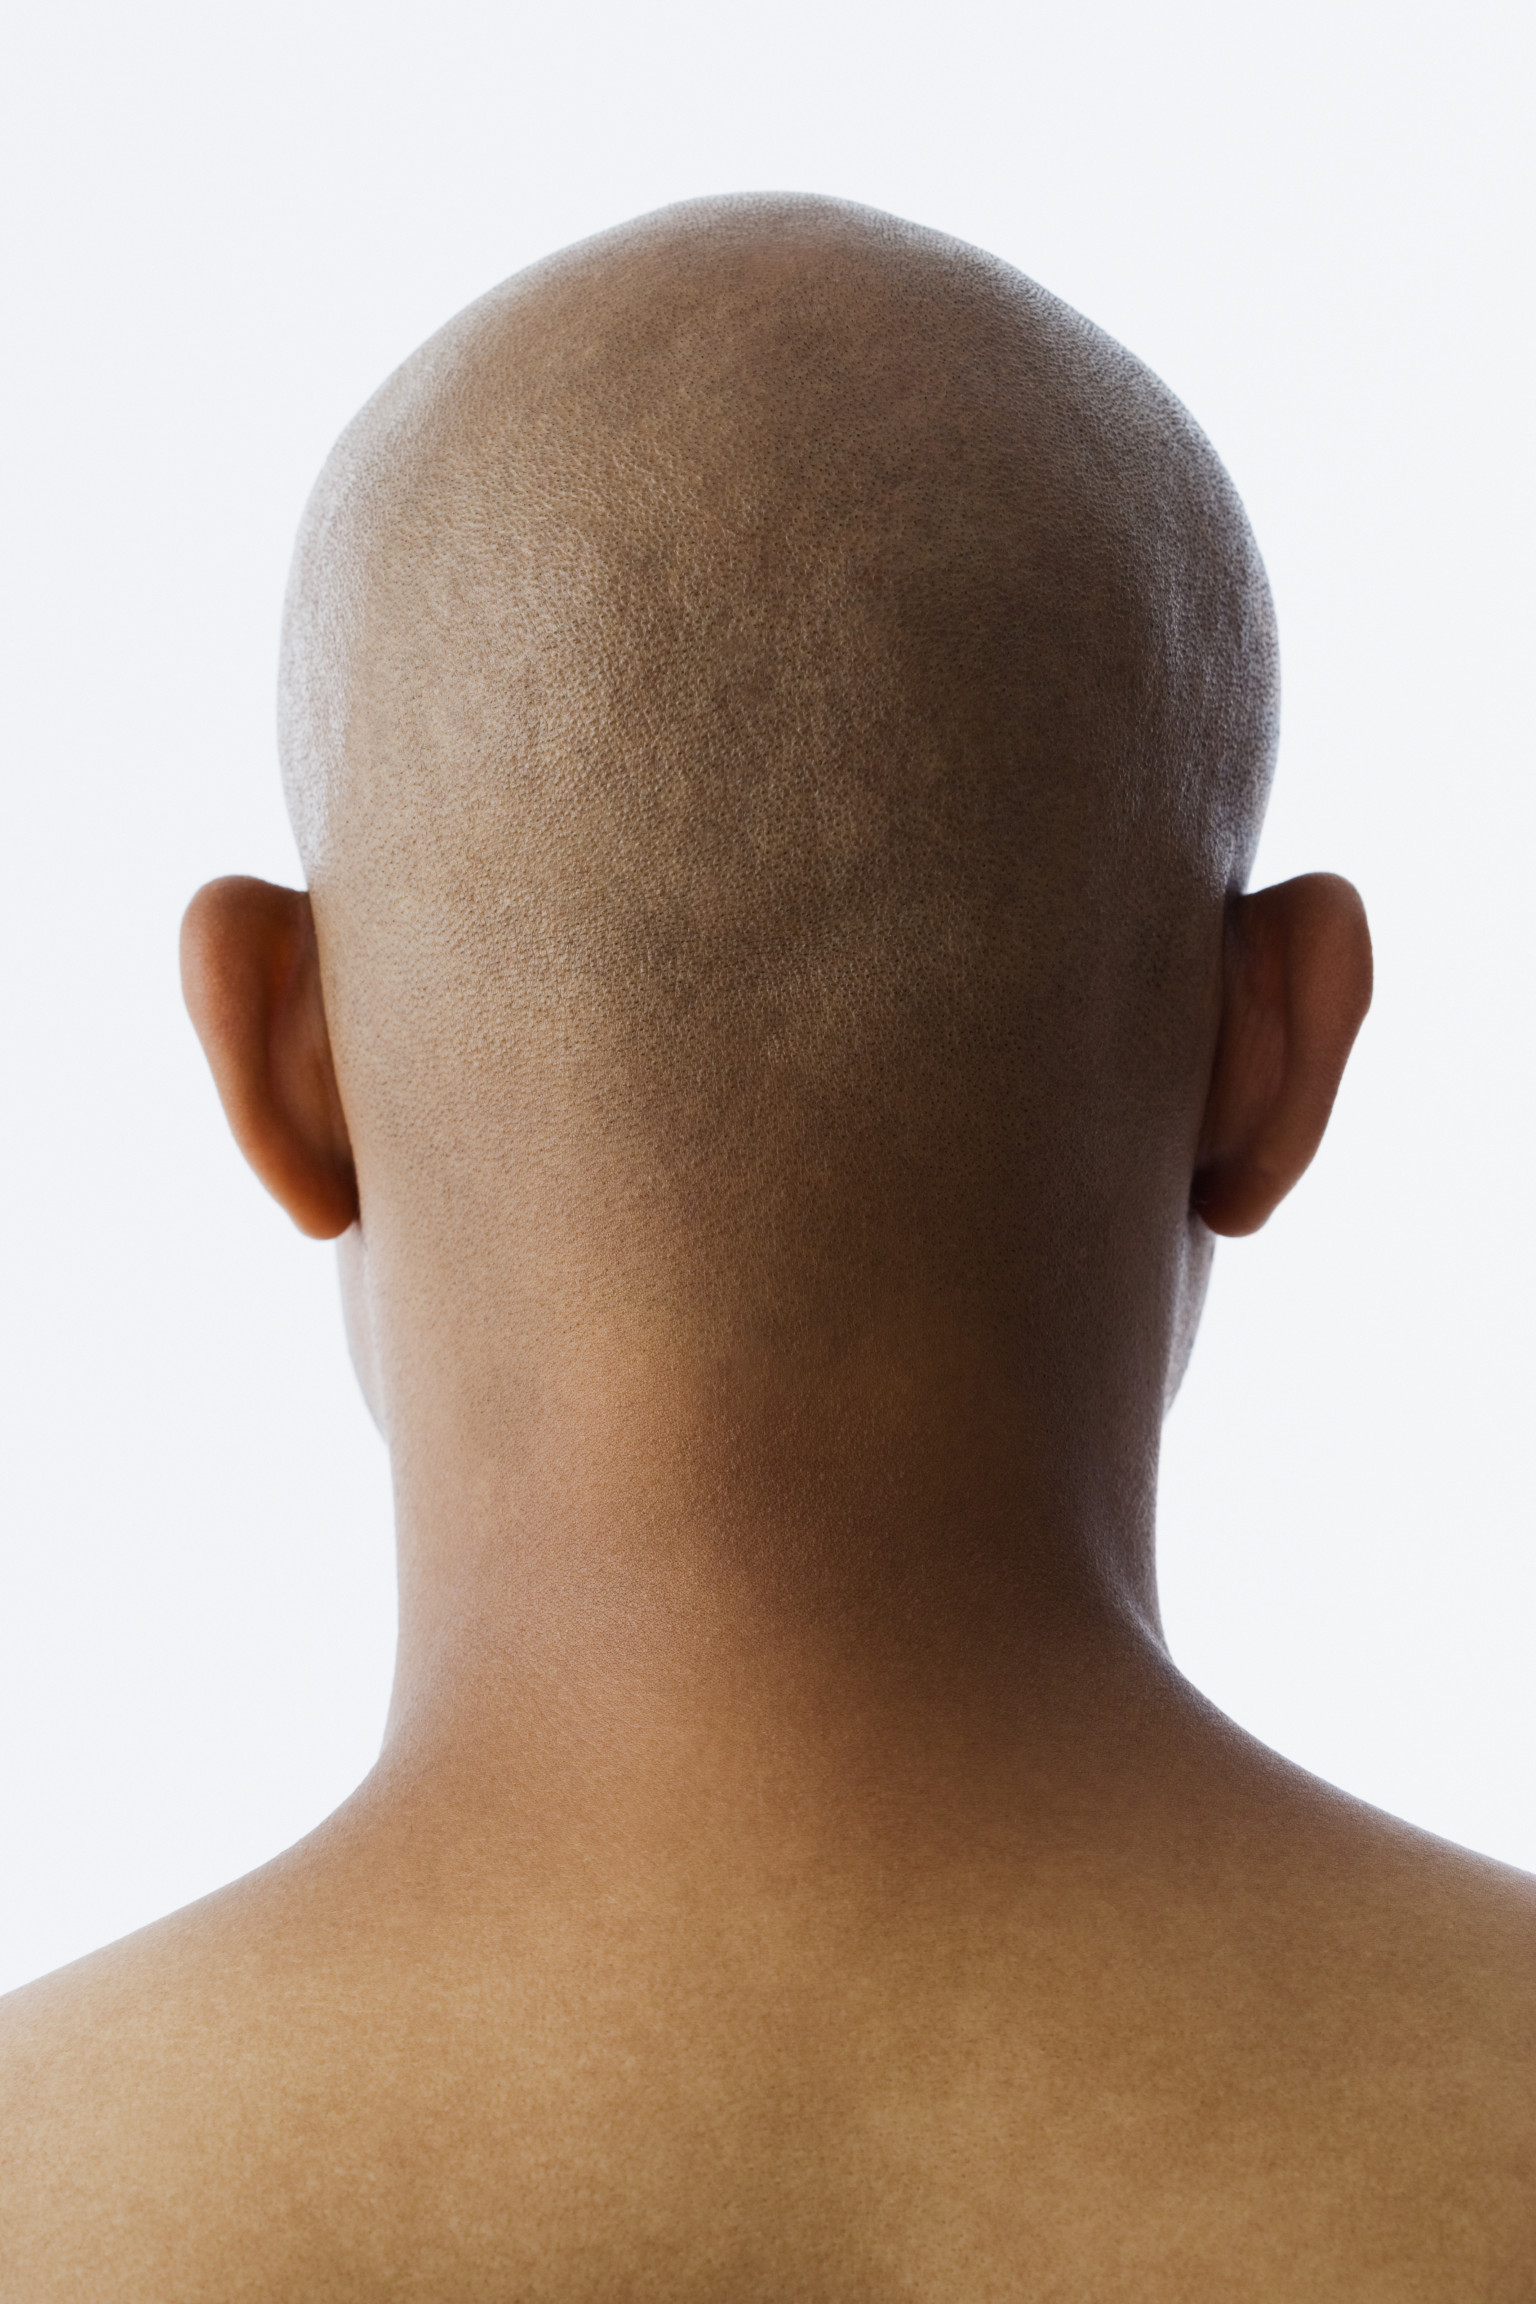 early-balding-may-raise-risk-of-als-study-finds-huffpost